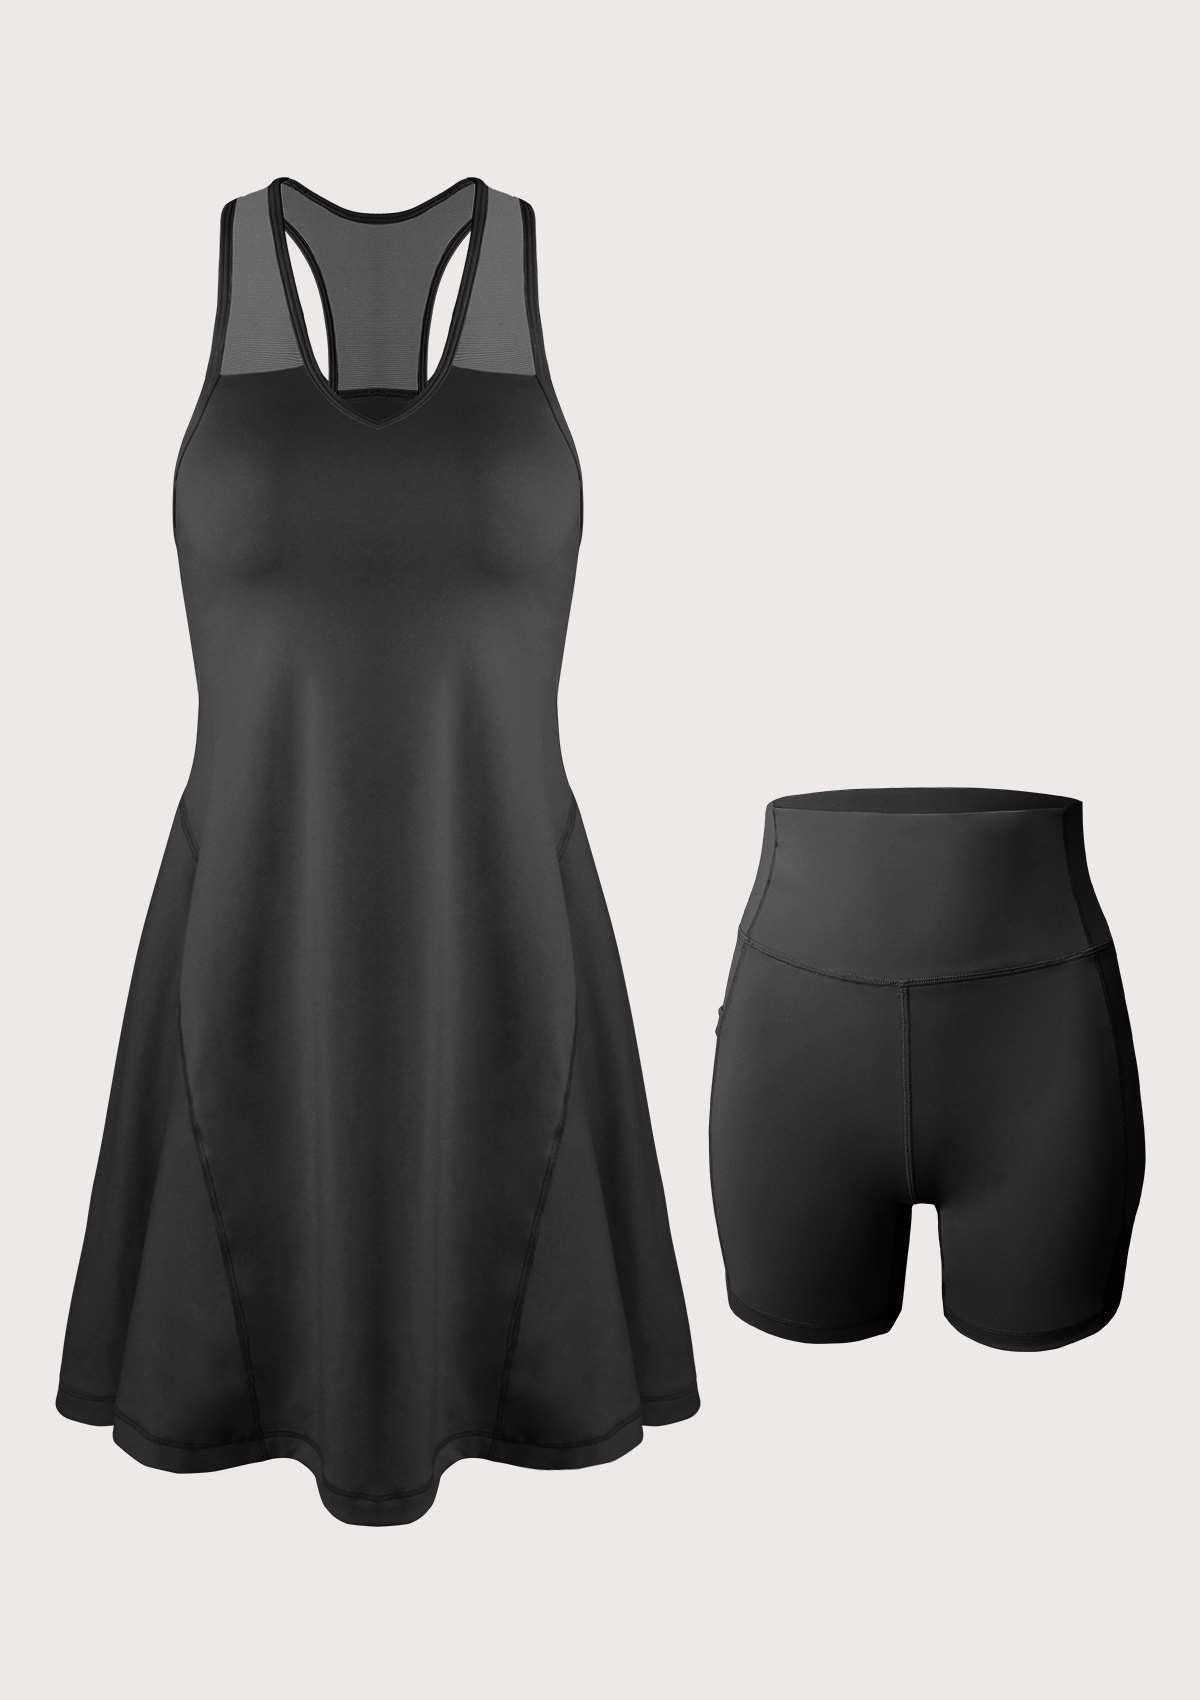 SONGFUL On The Move Sports Dress With Shorts Set - XS / Black